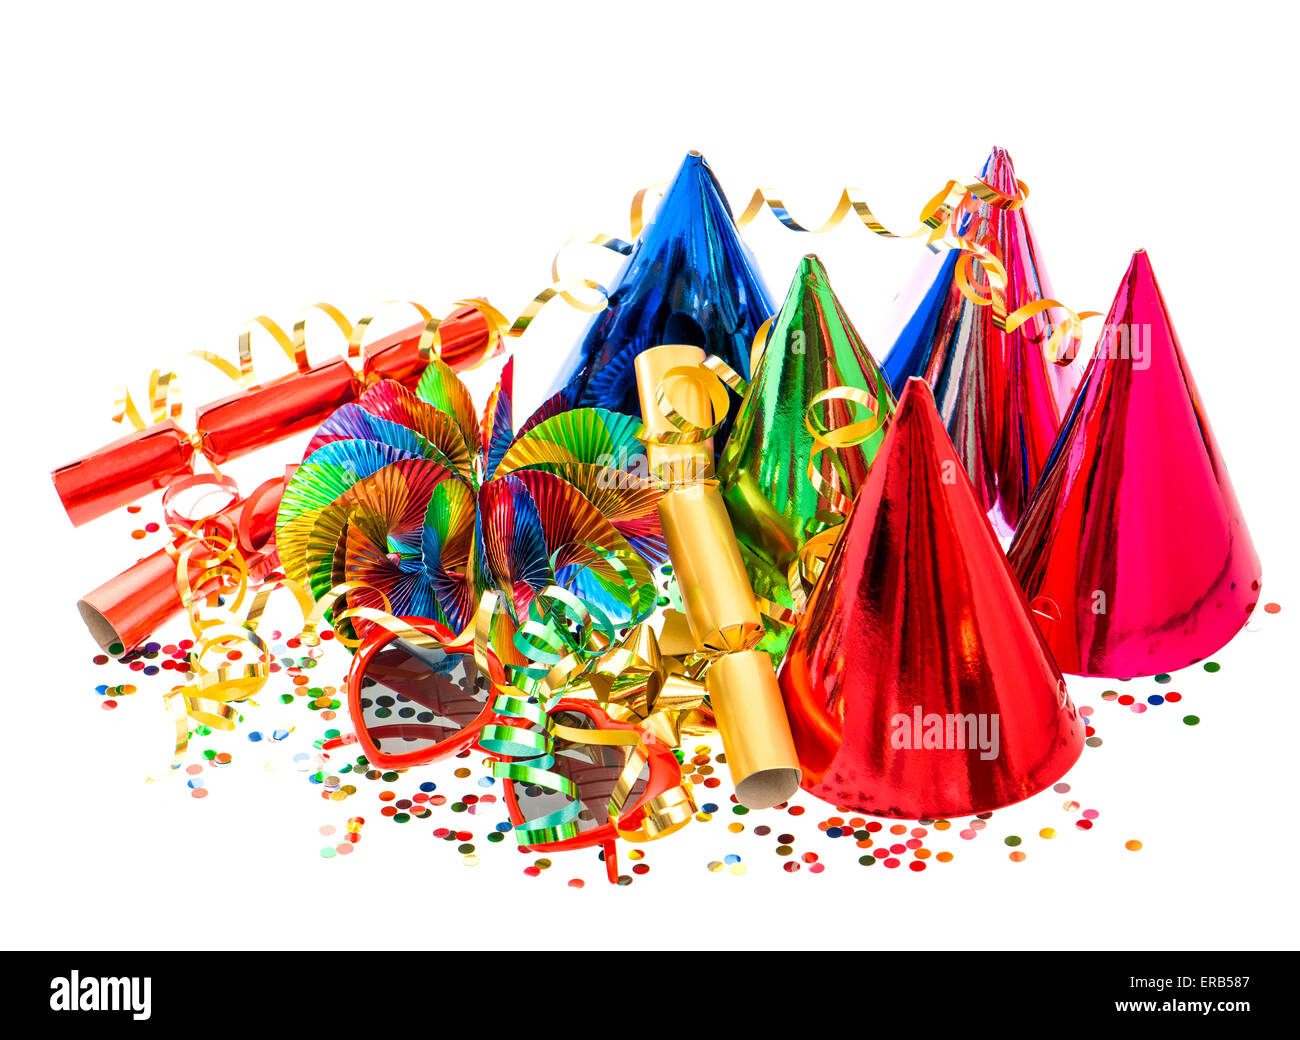 Garlands, streamer, party hats and confetti. Festive decorations and items background Stock Photo